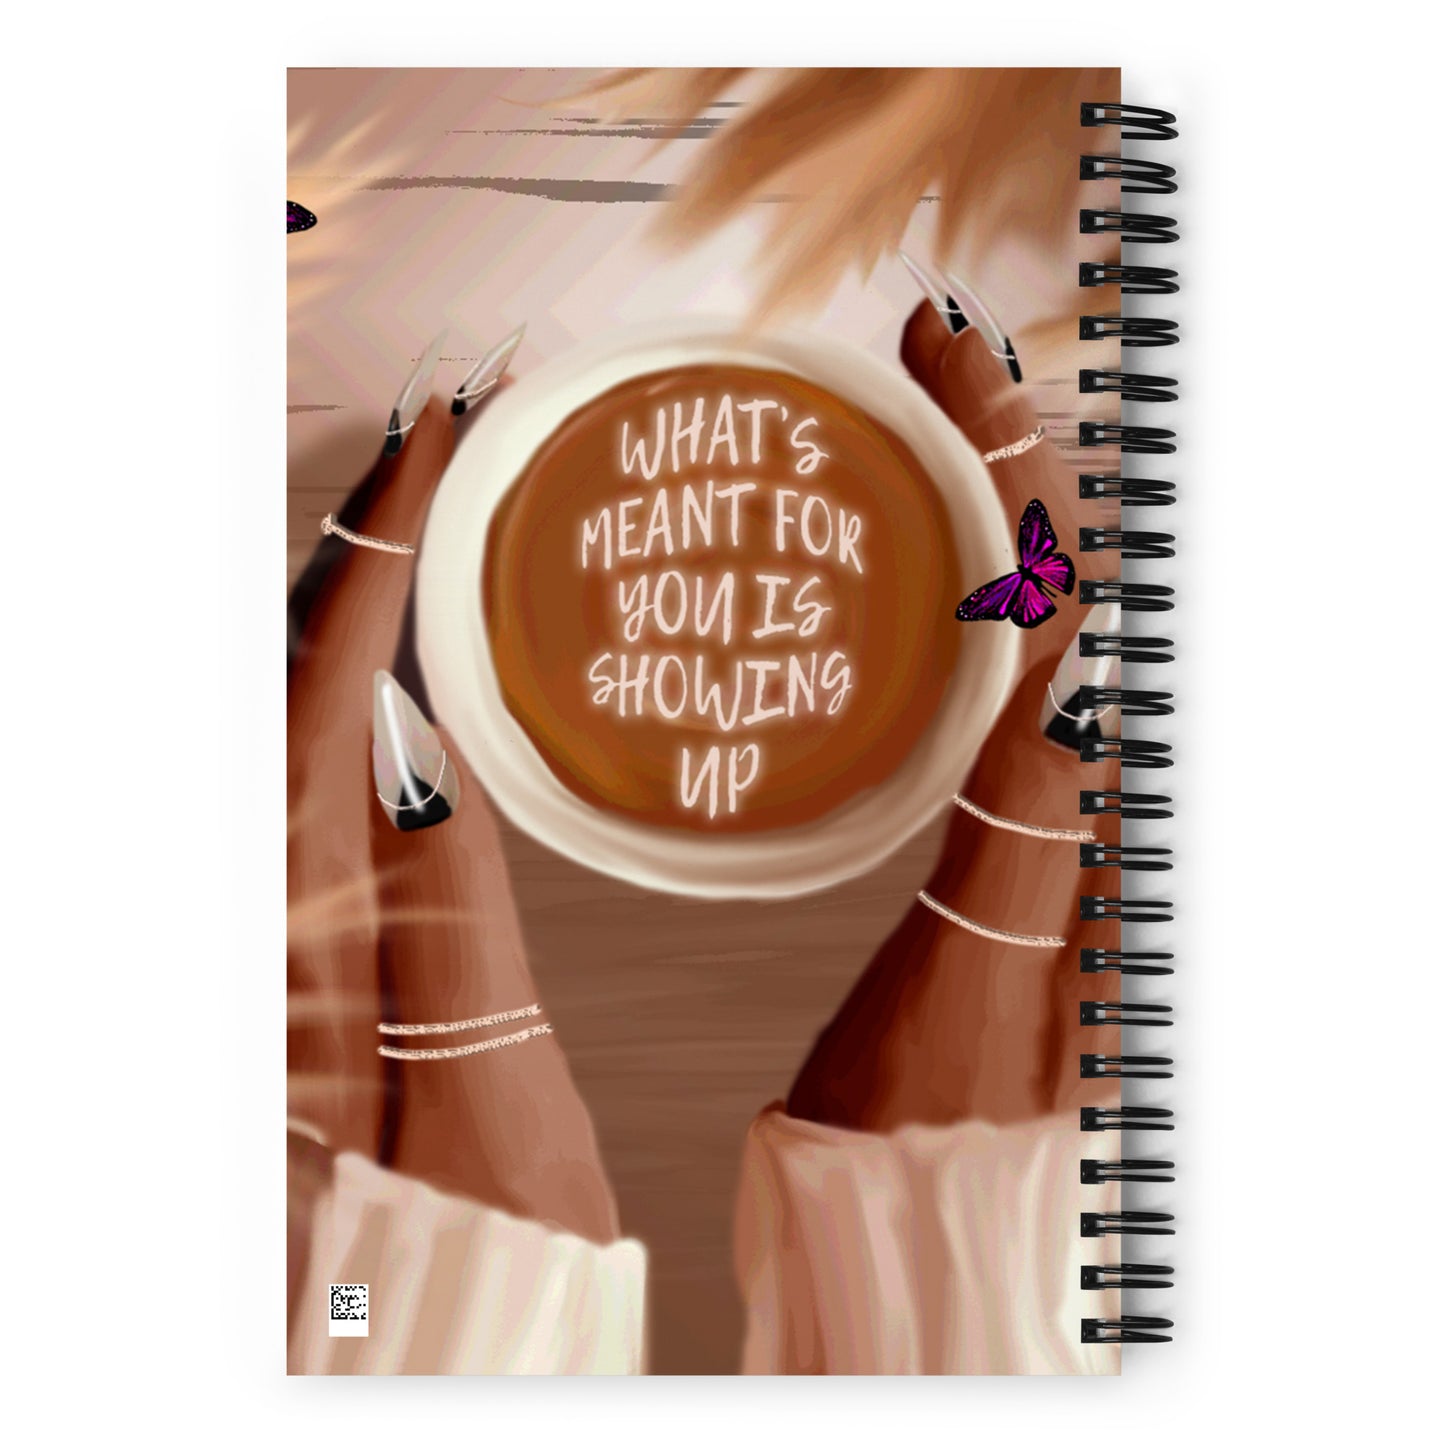 Showing up spiral notebook